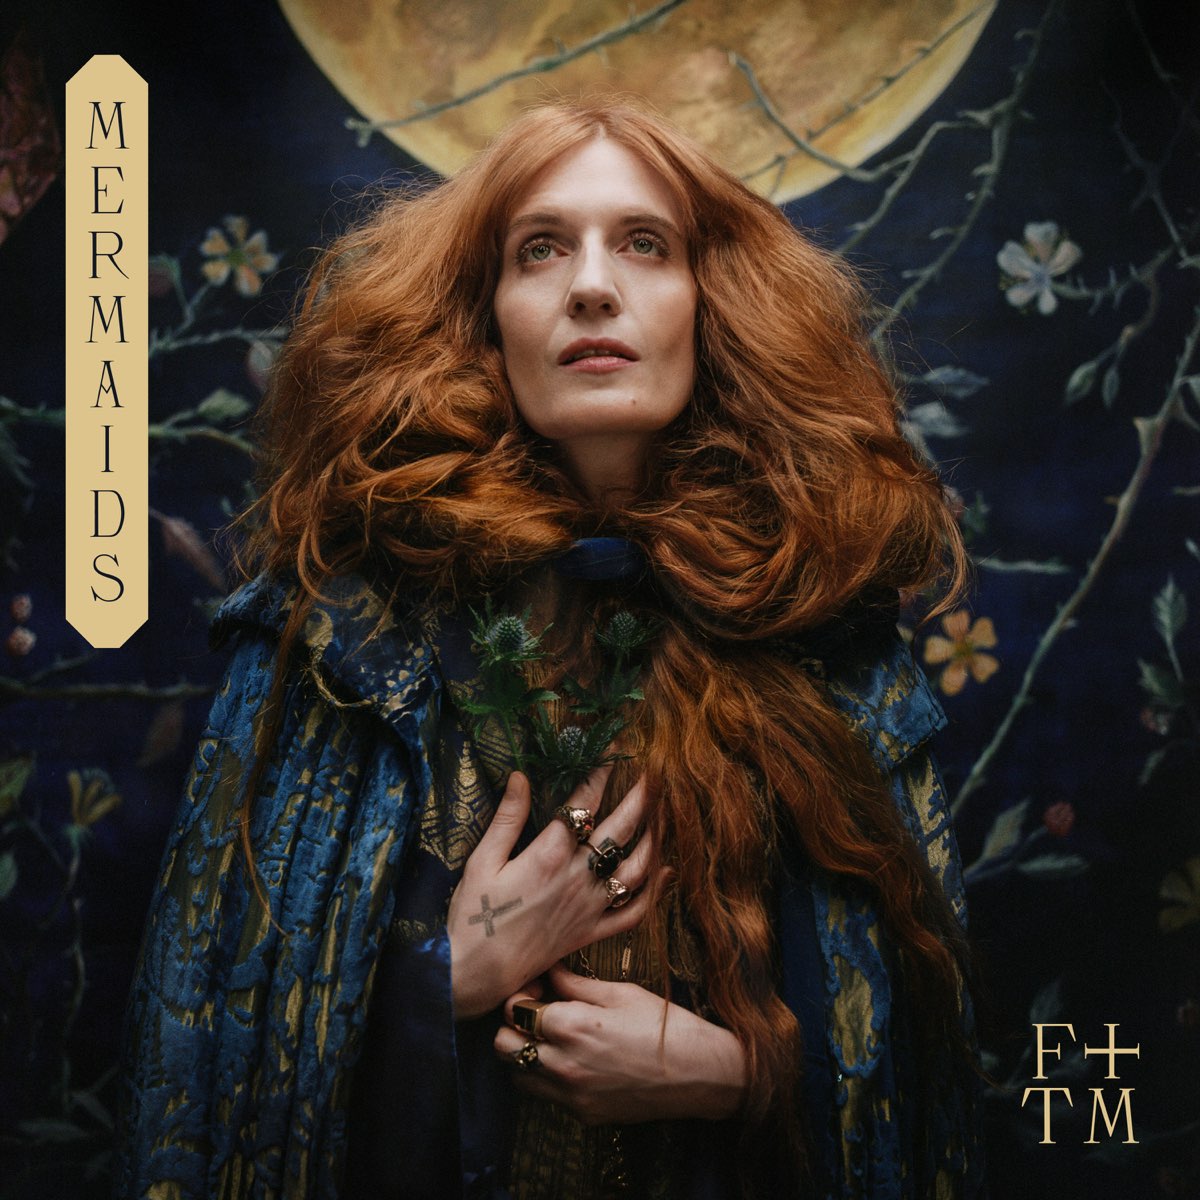 Florence + the Machine — Mermaids cover artwork